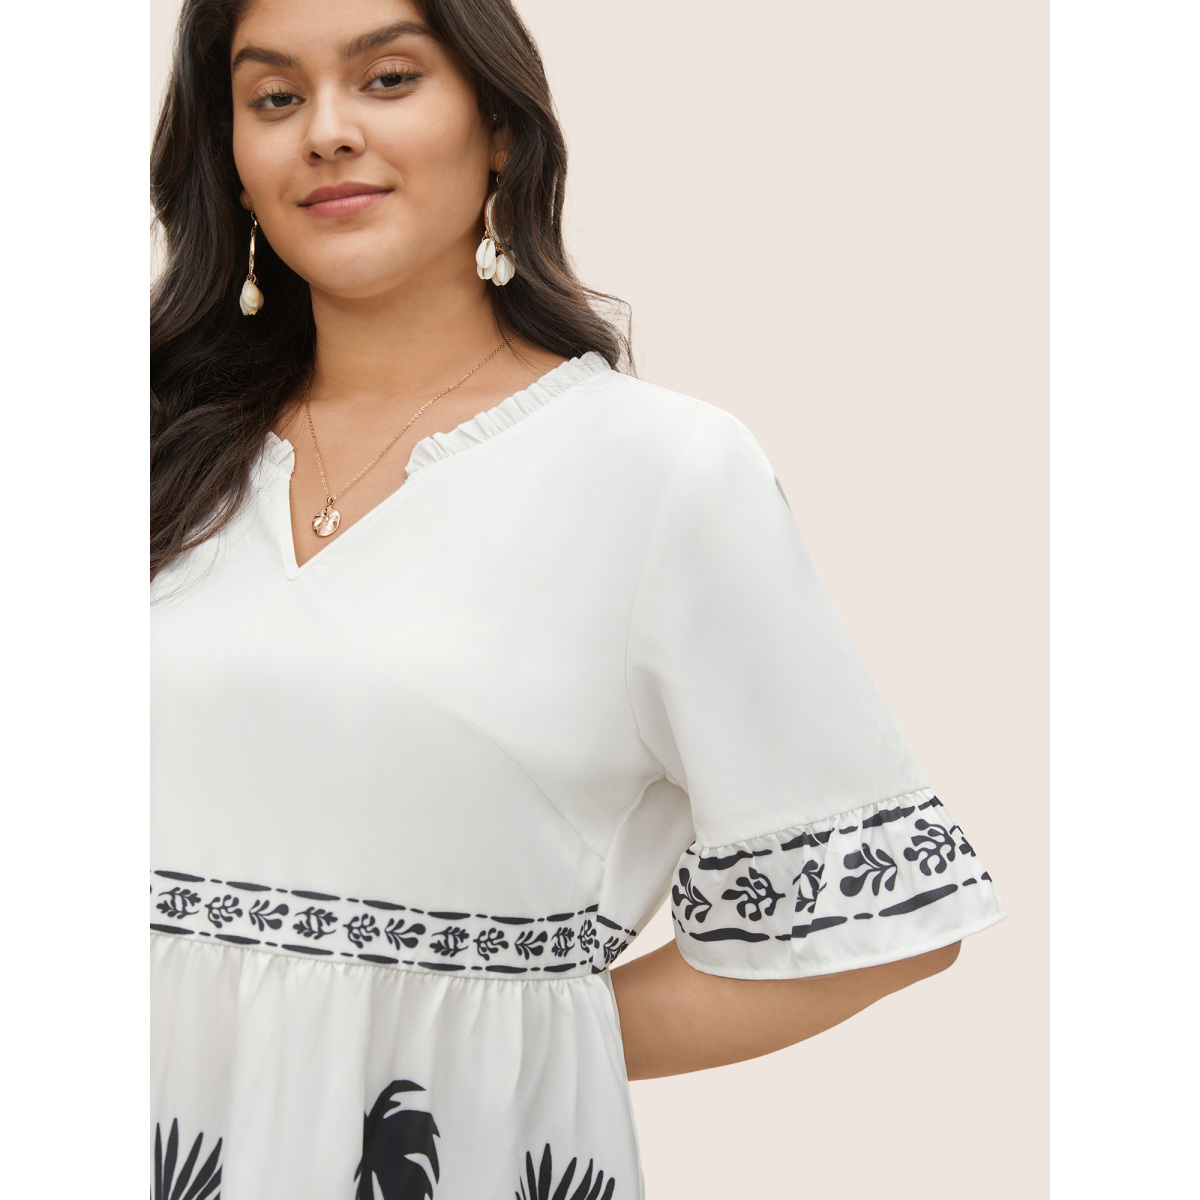 

Plus Size White Silhouette Floral Print Frill Trim Gathered Blouse Women Resort Half Sleeve V-neck Vacation Blouses BloomChic